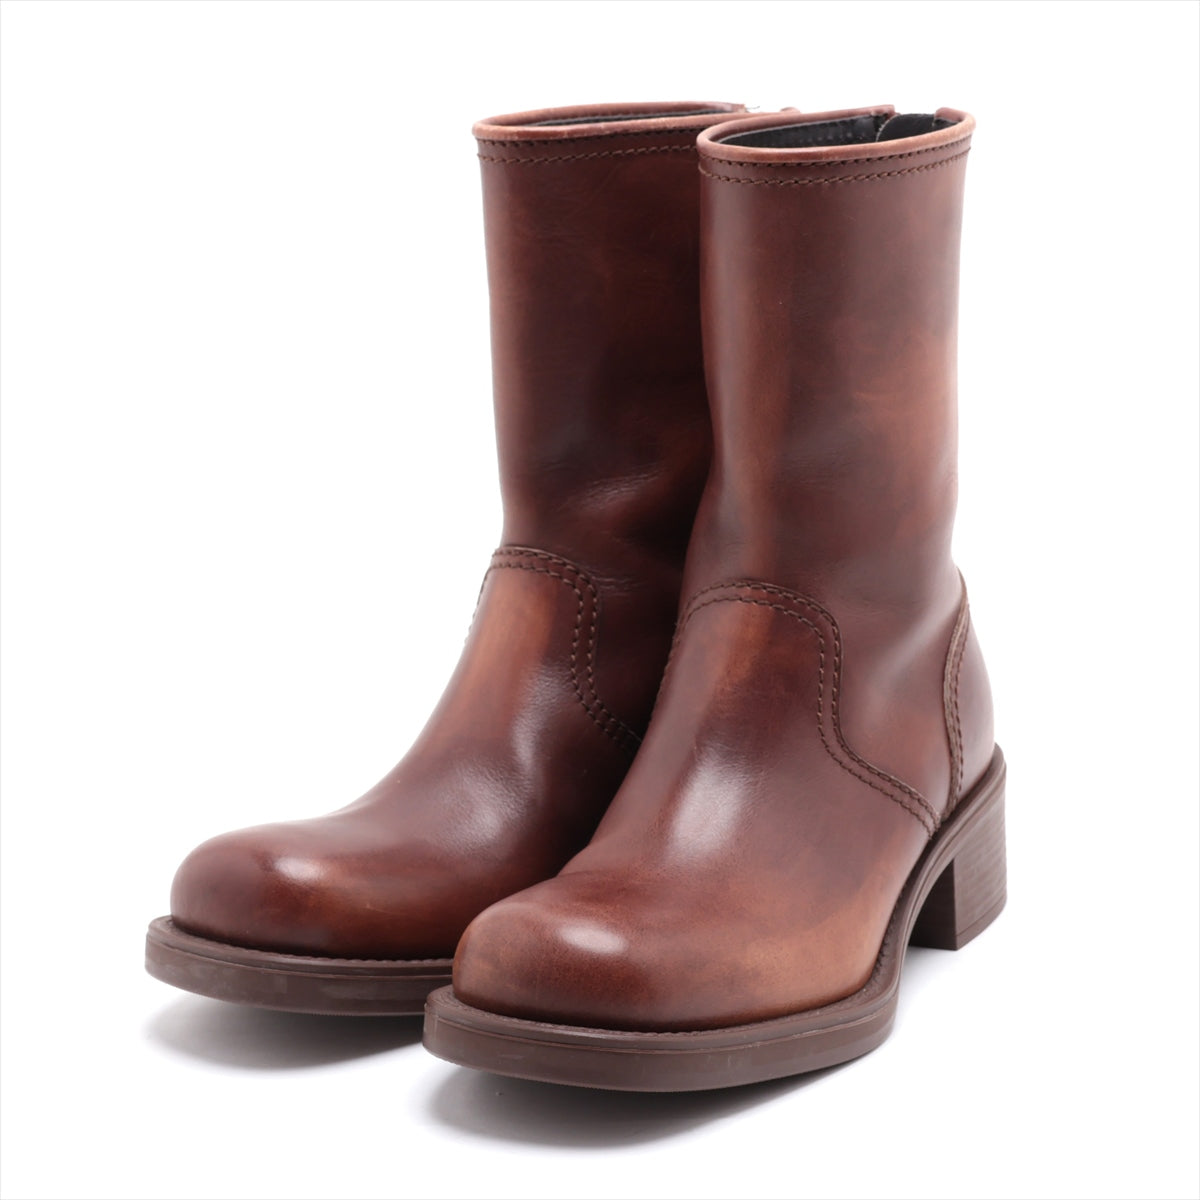 Miu Miu Leather Short Boots 36 Ladies' Brown Zip Vintage processing box There is a storage bag